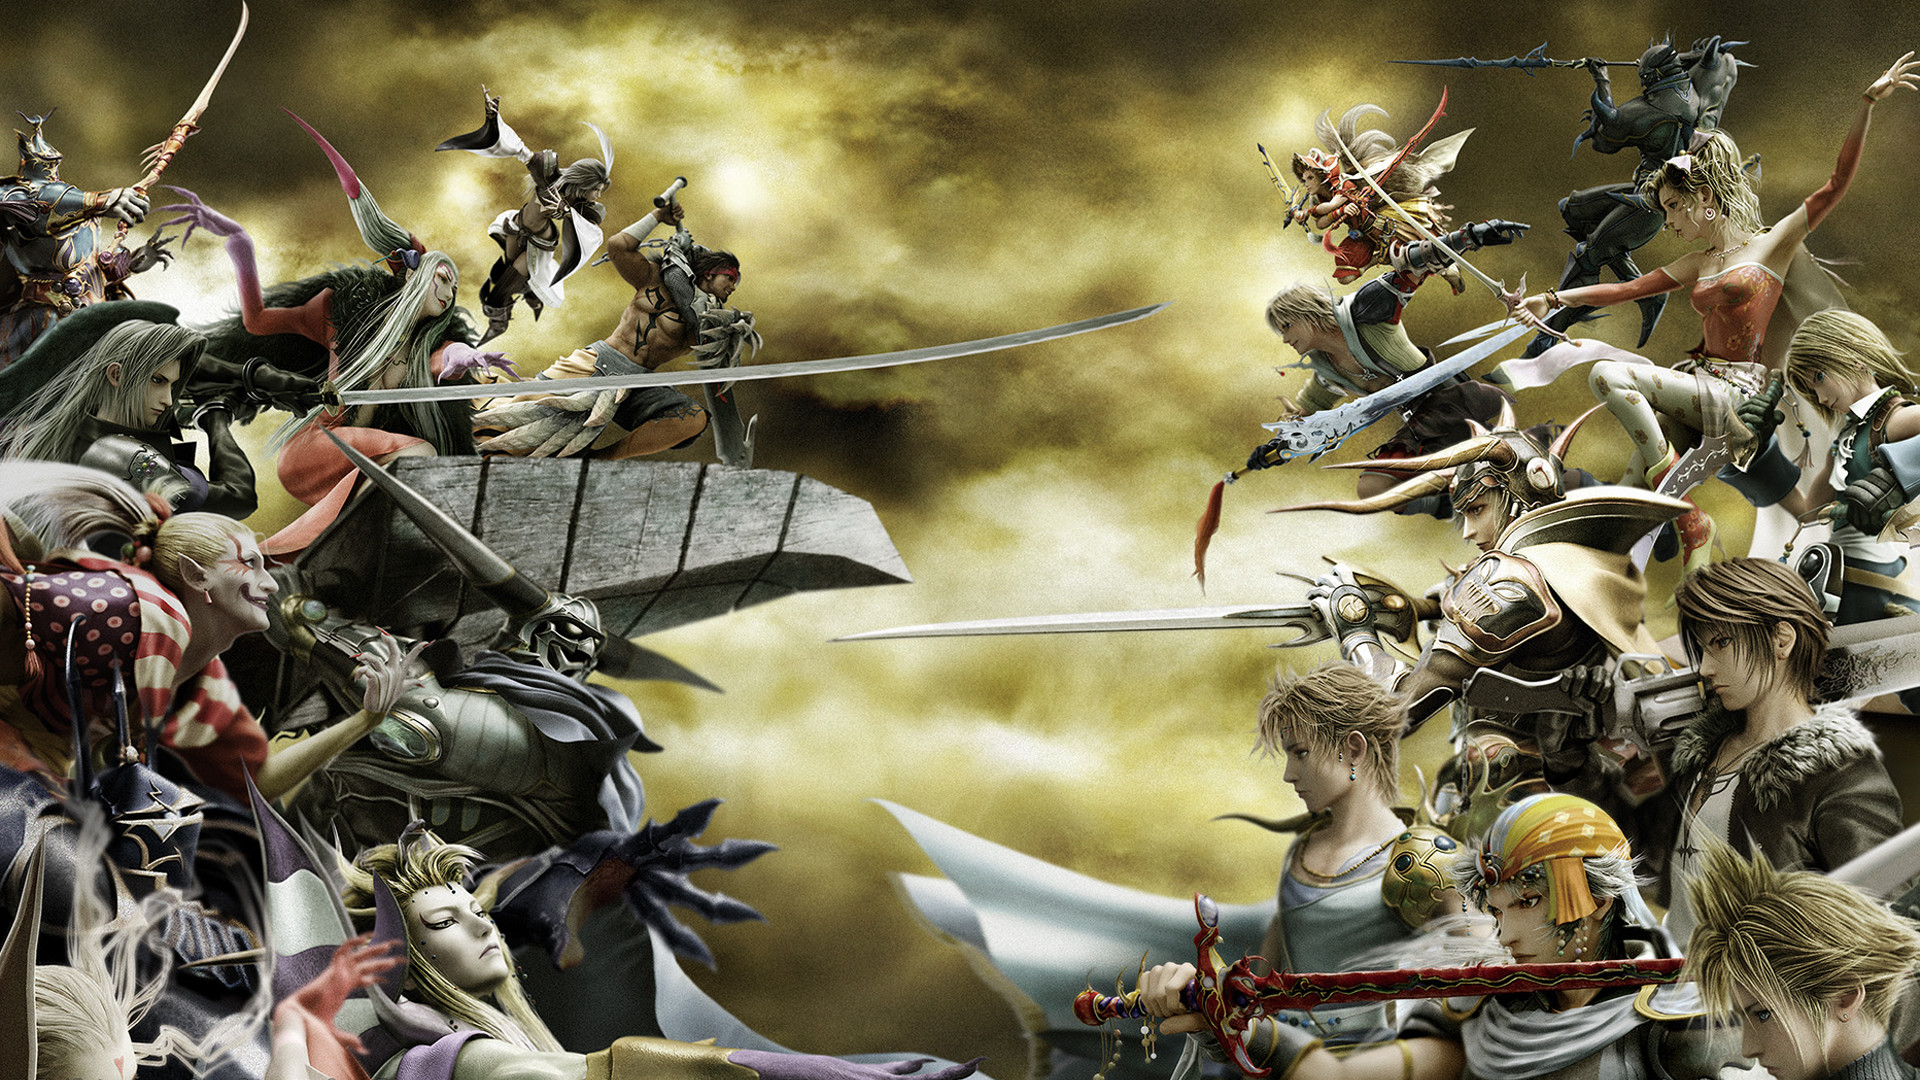 1920x1080 Search Results for “dissidia final fantasy psp wallpaper” – Adorable  Wallpapers